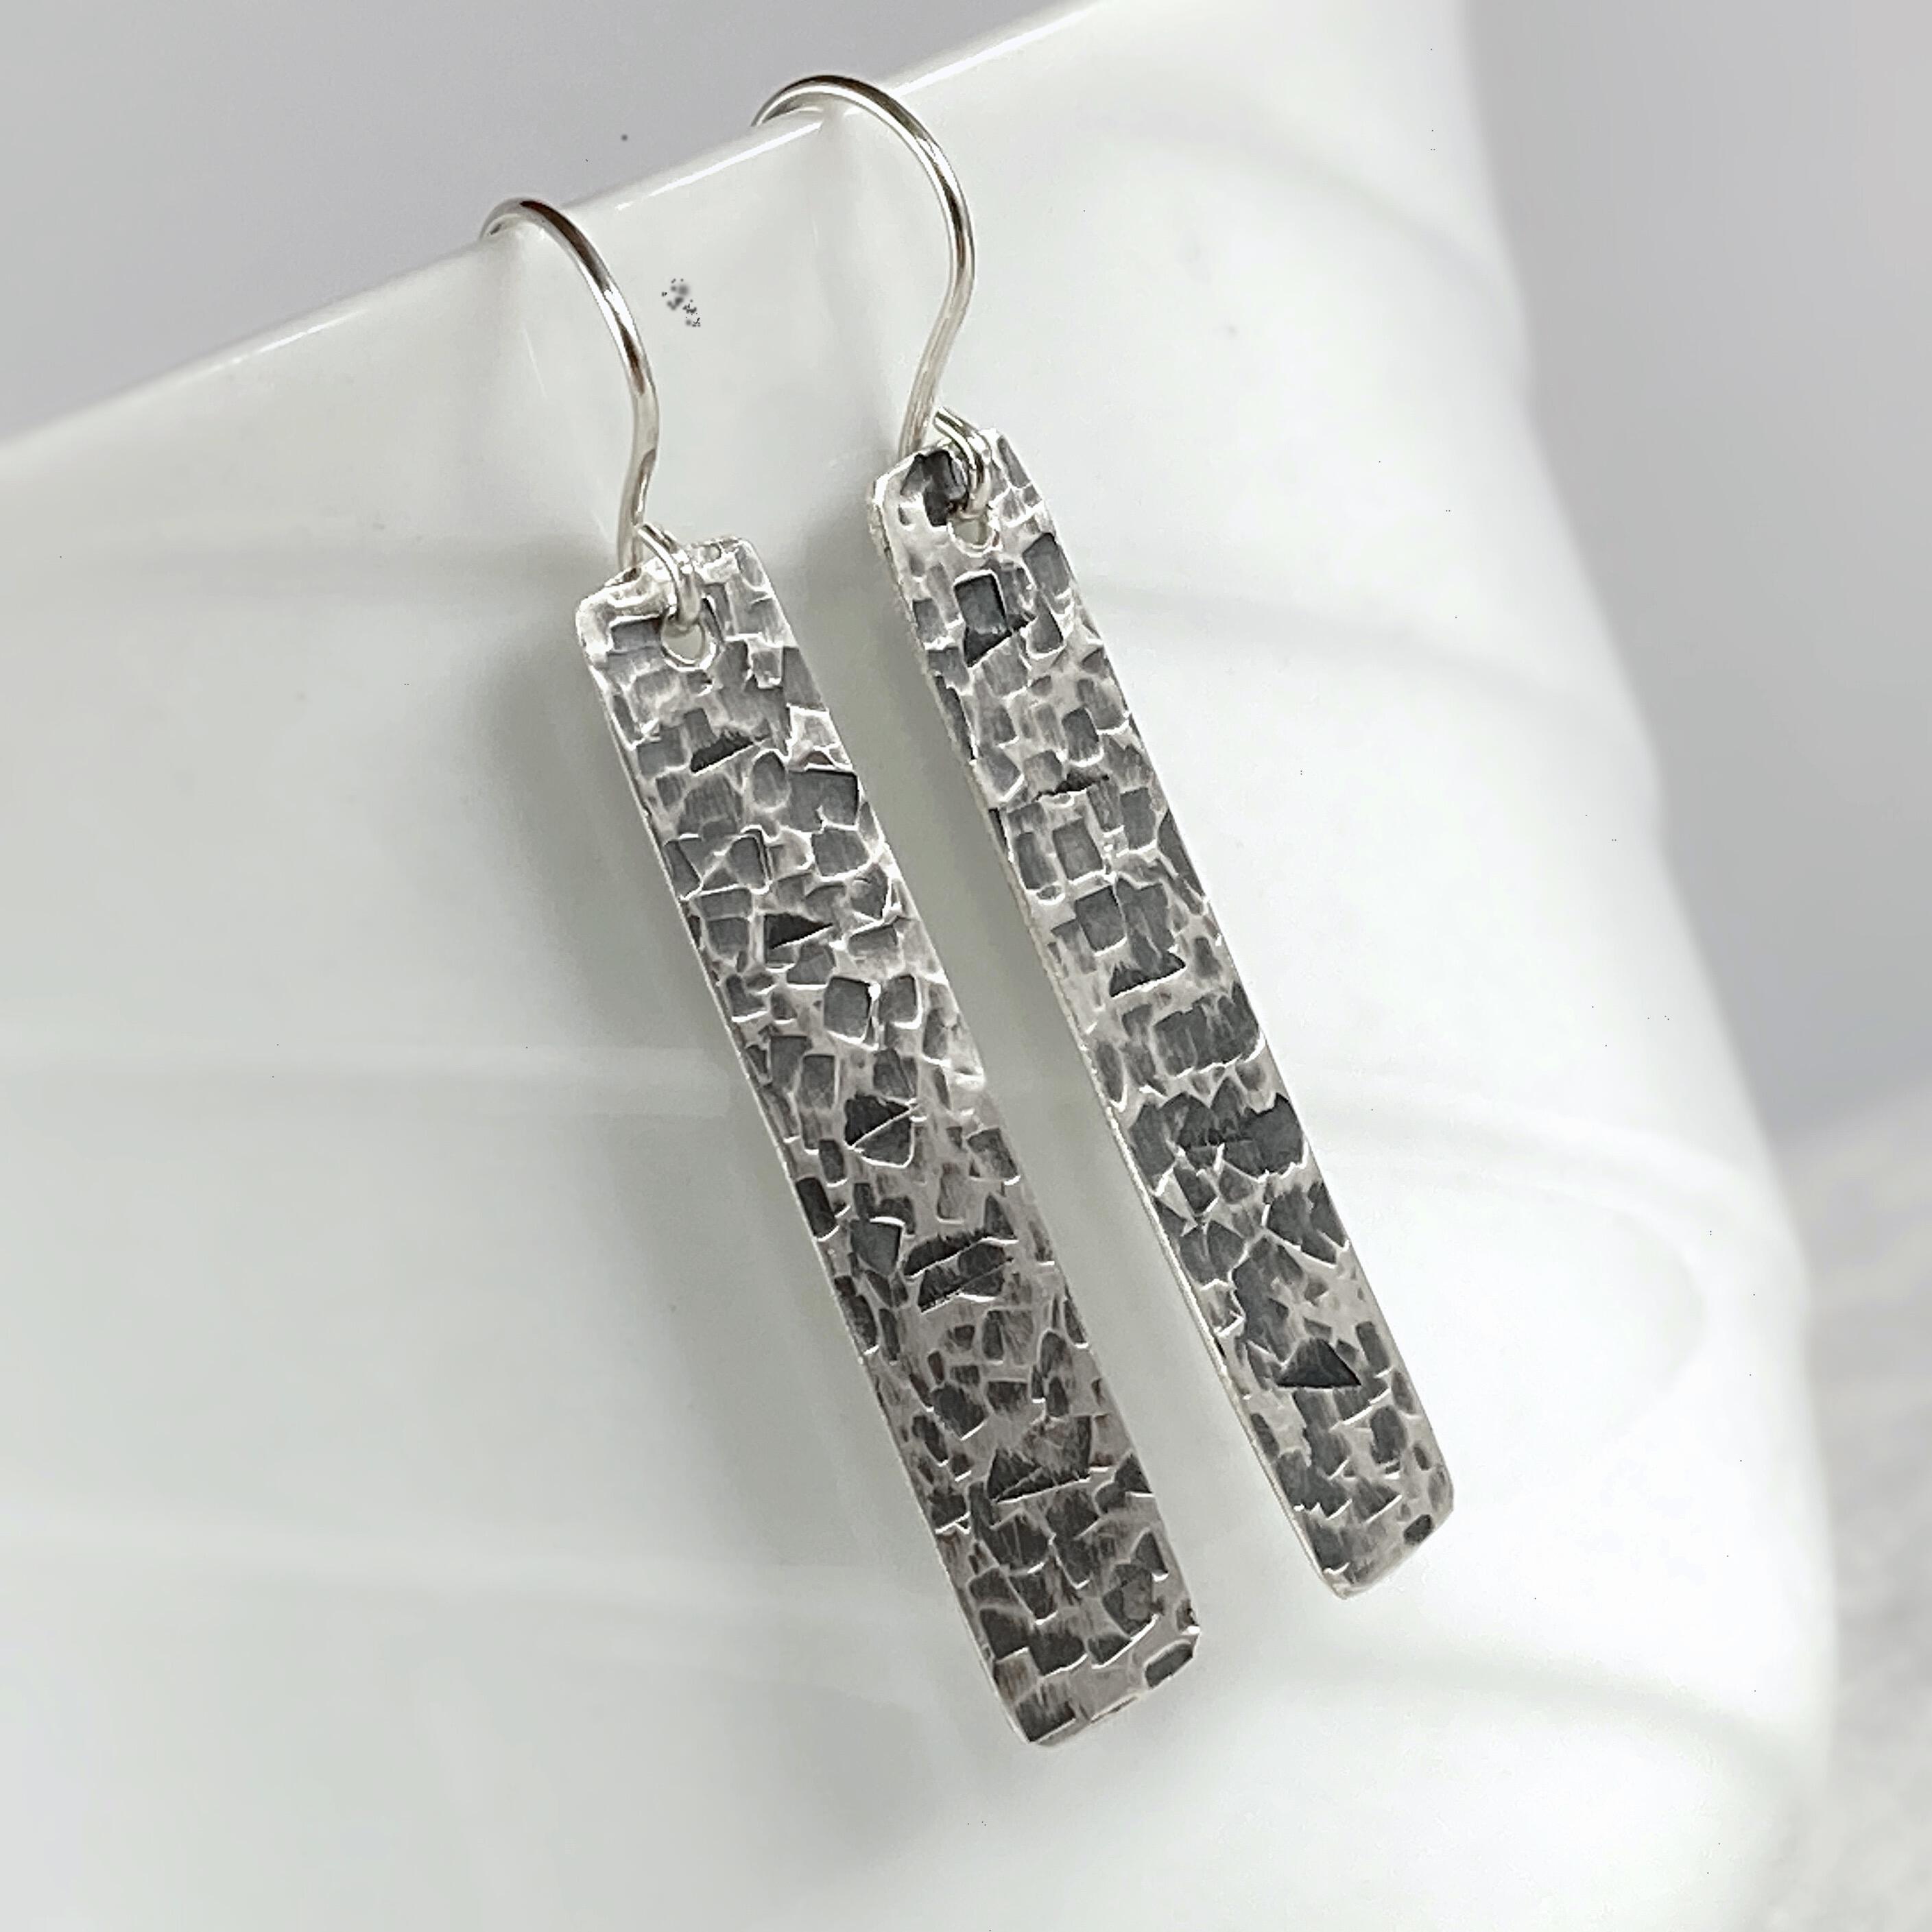 Hammered Rectangle Bar Earrings in Sterling Silver that are 2 and